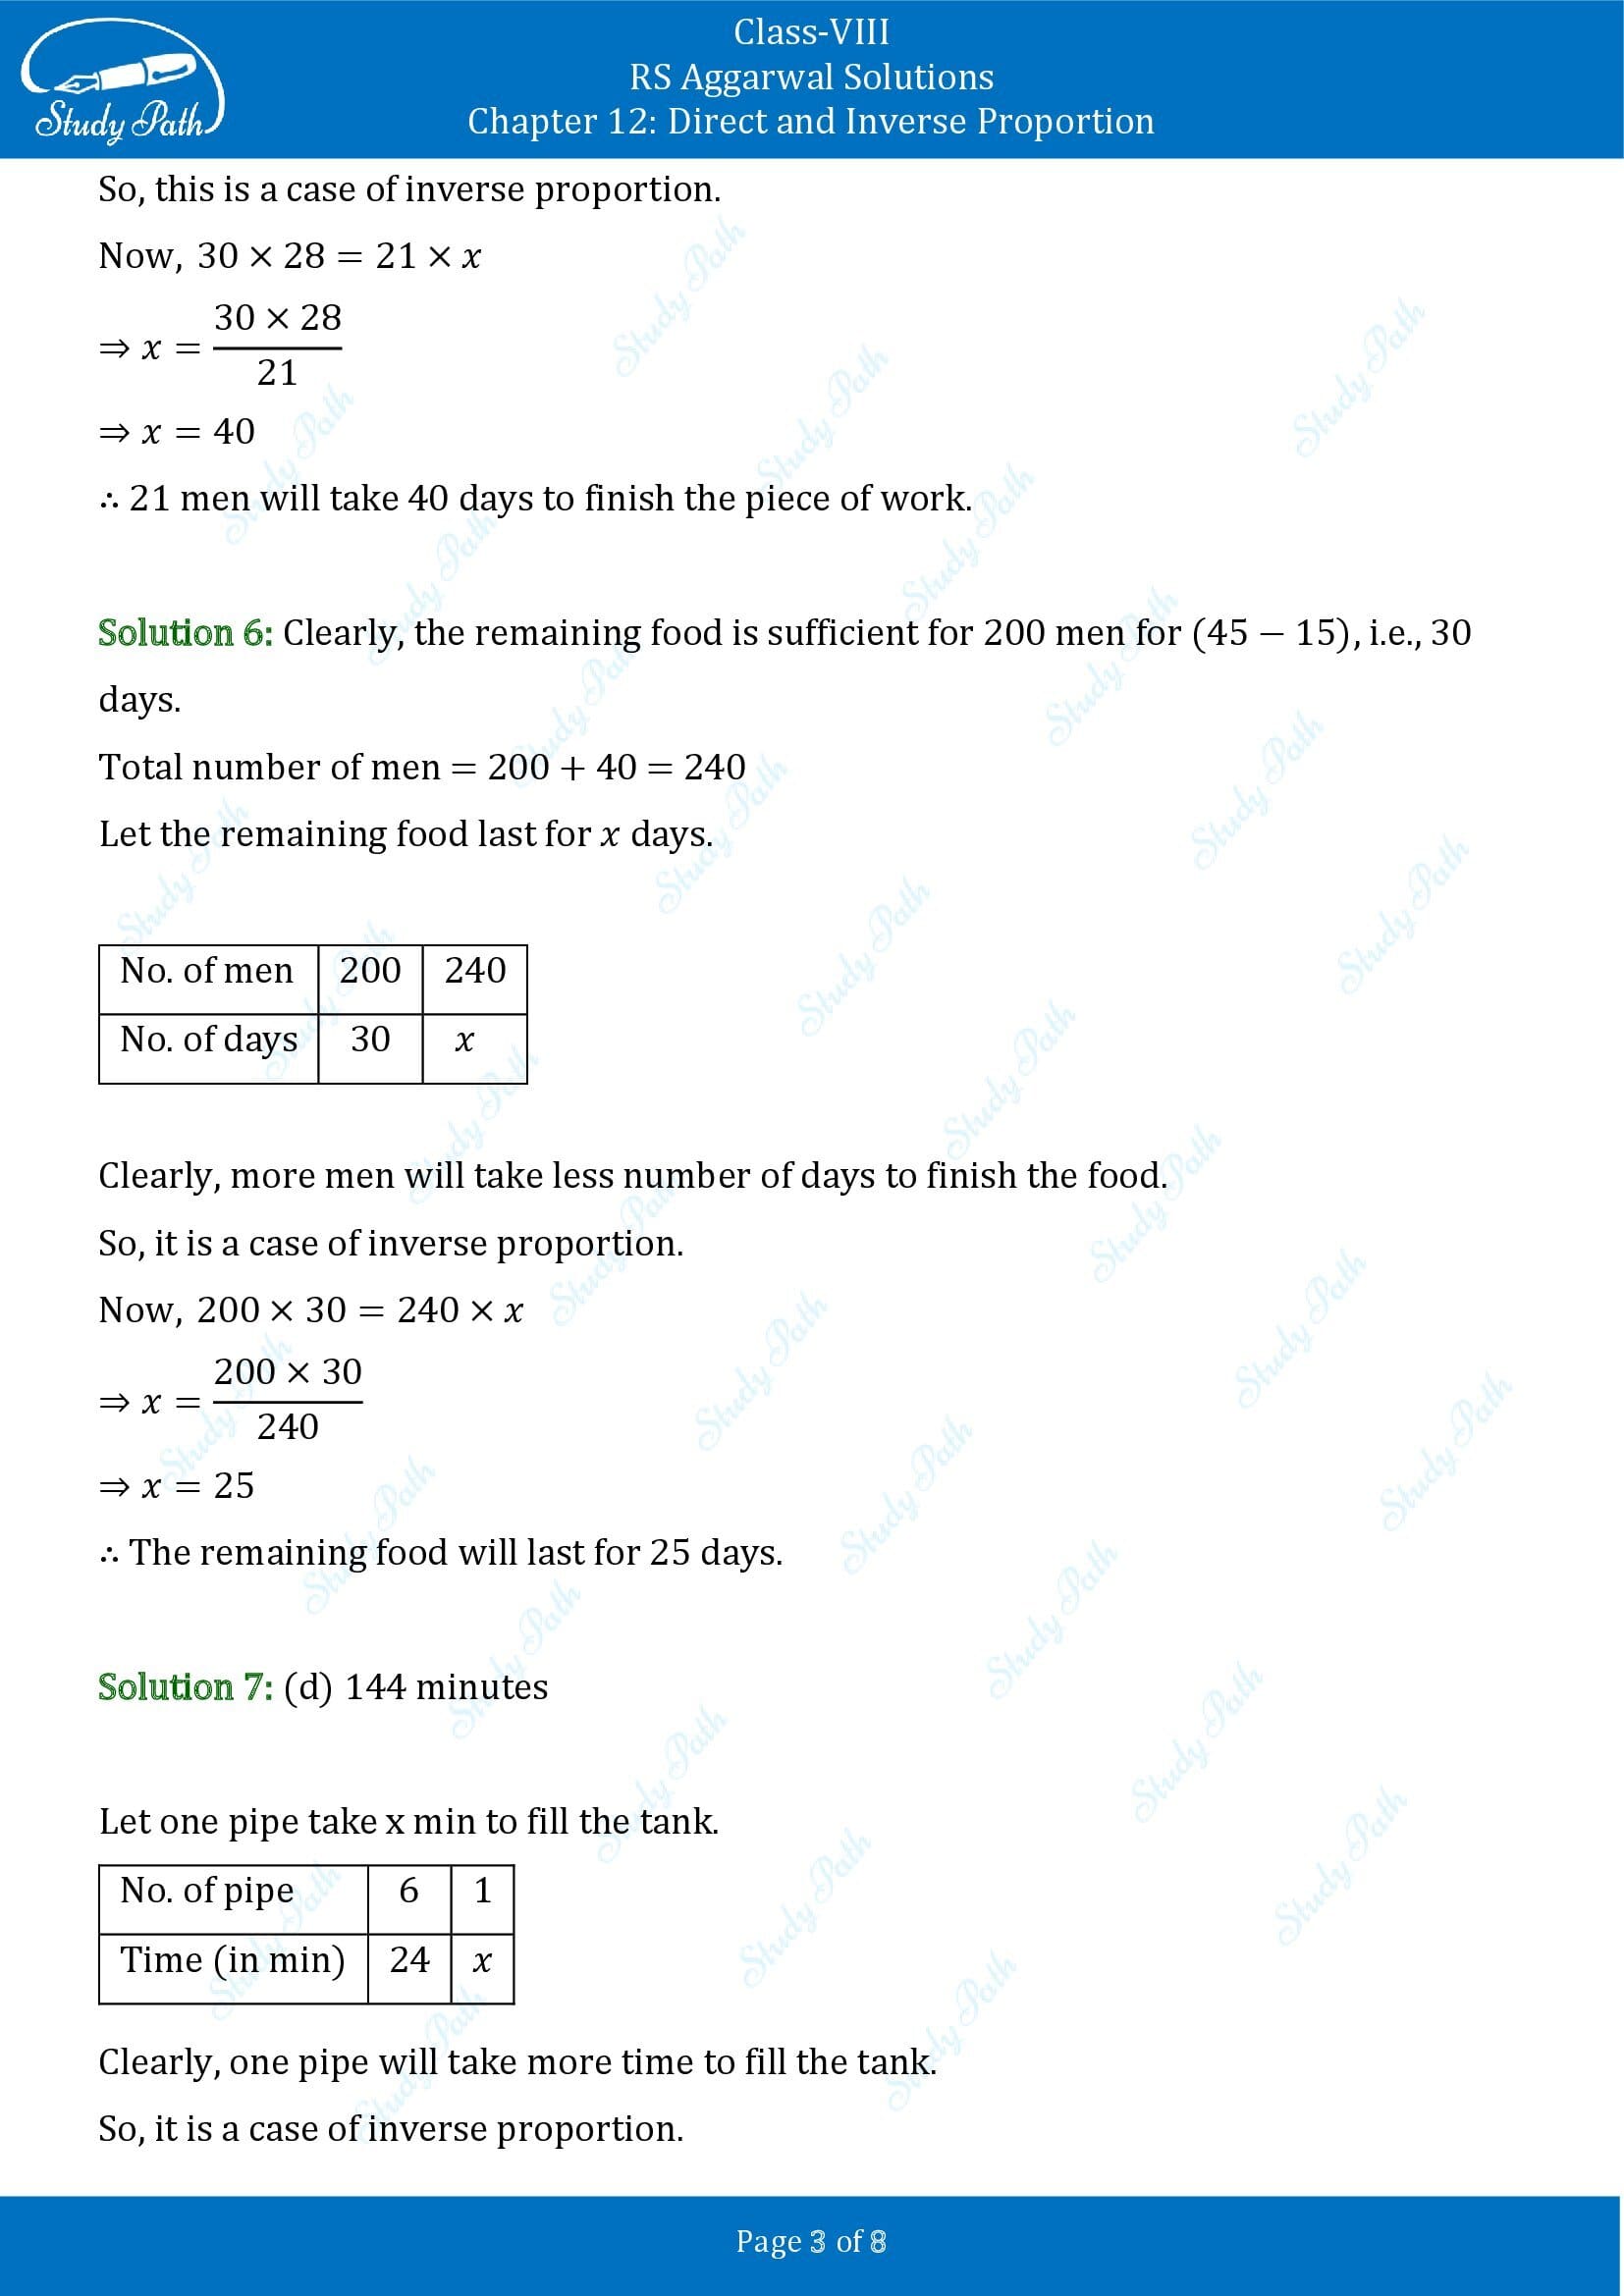 RS Aggarwal Solutions Class 8 Chapter 12 Direct and Inverse Proportion Test Paper 00003